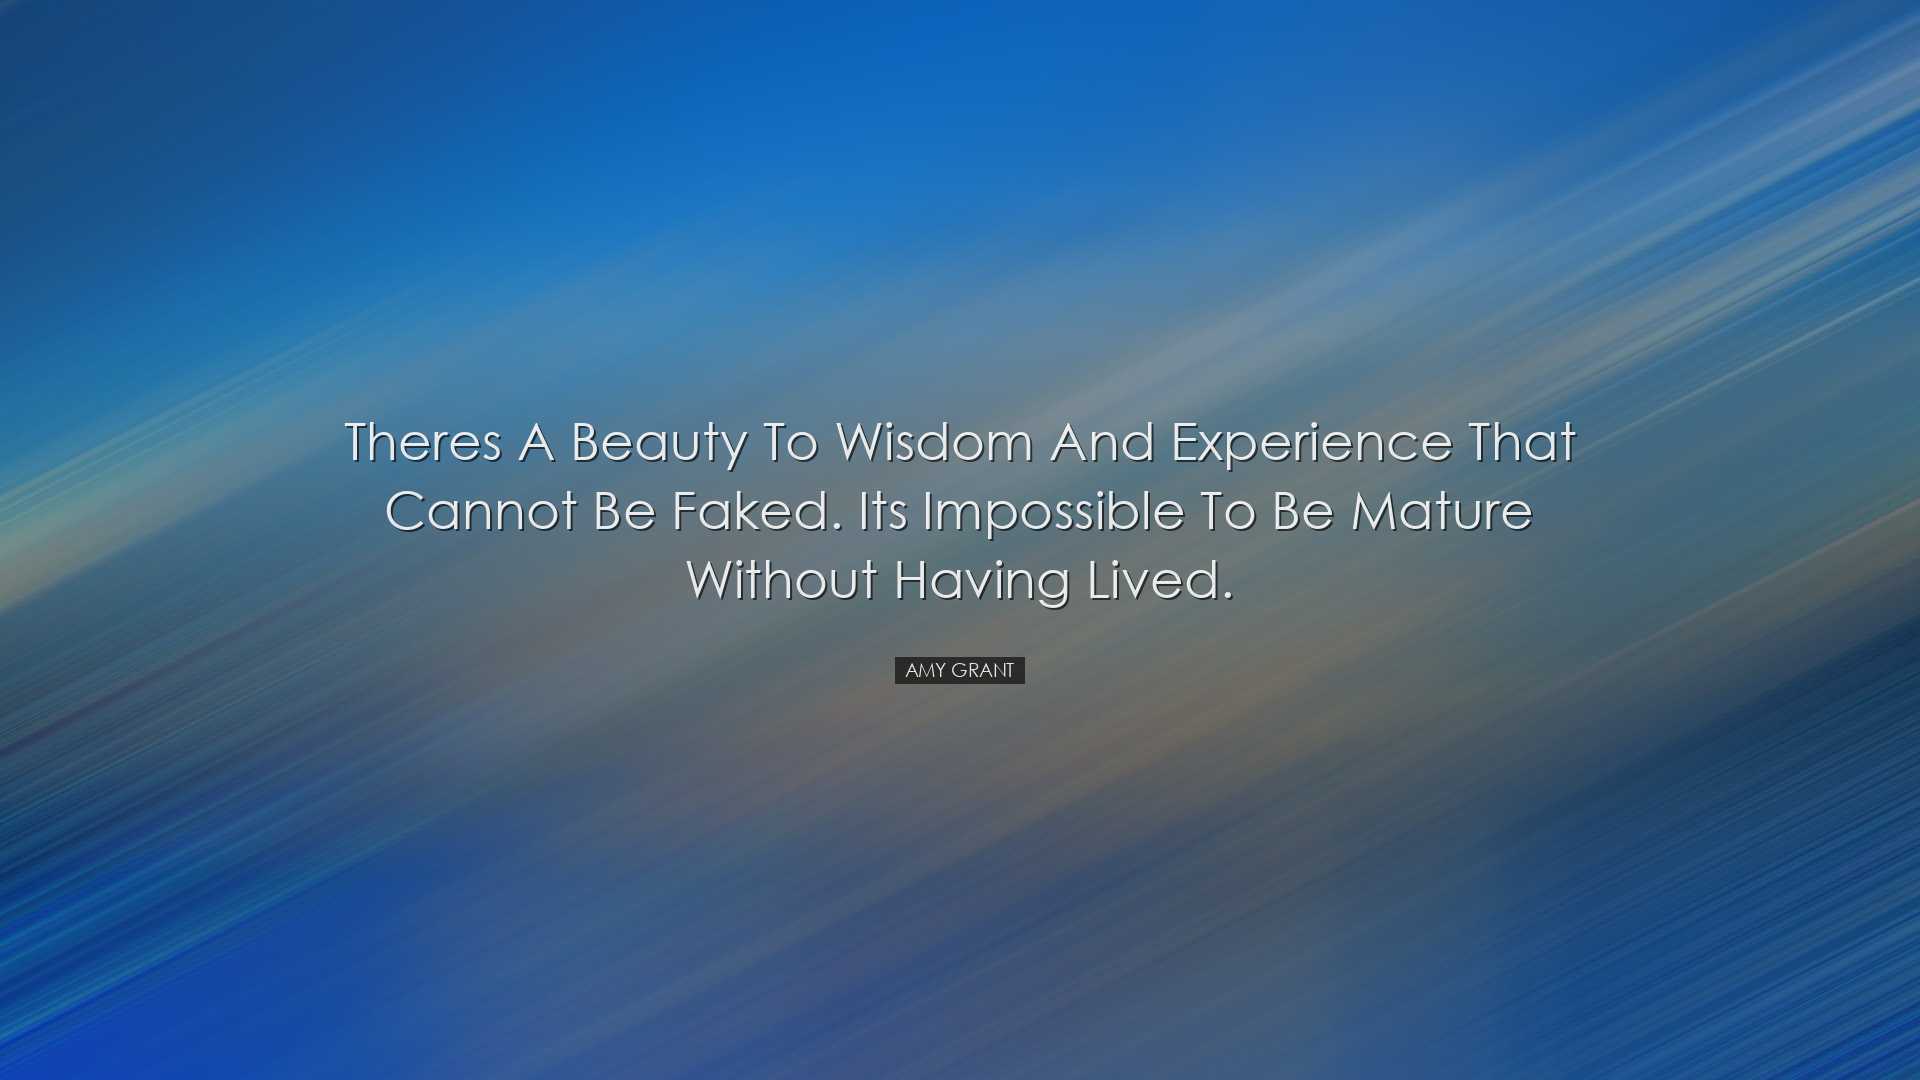 Theres a beauty to wisdom and experience that cannot be faked. Its